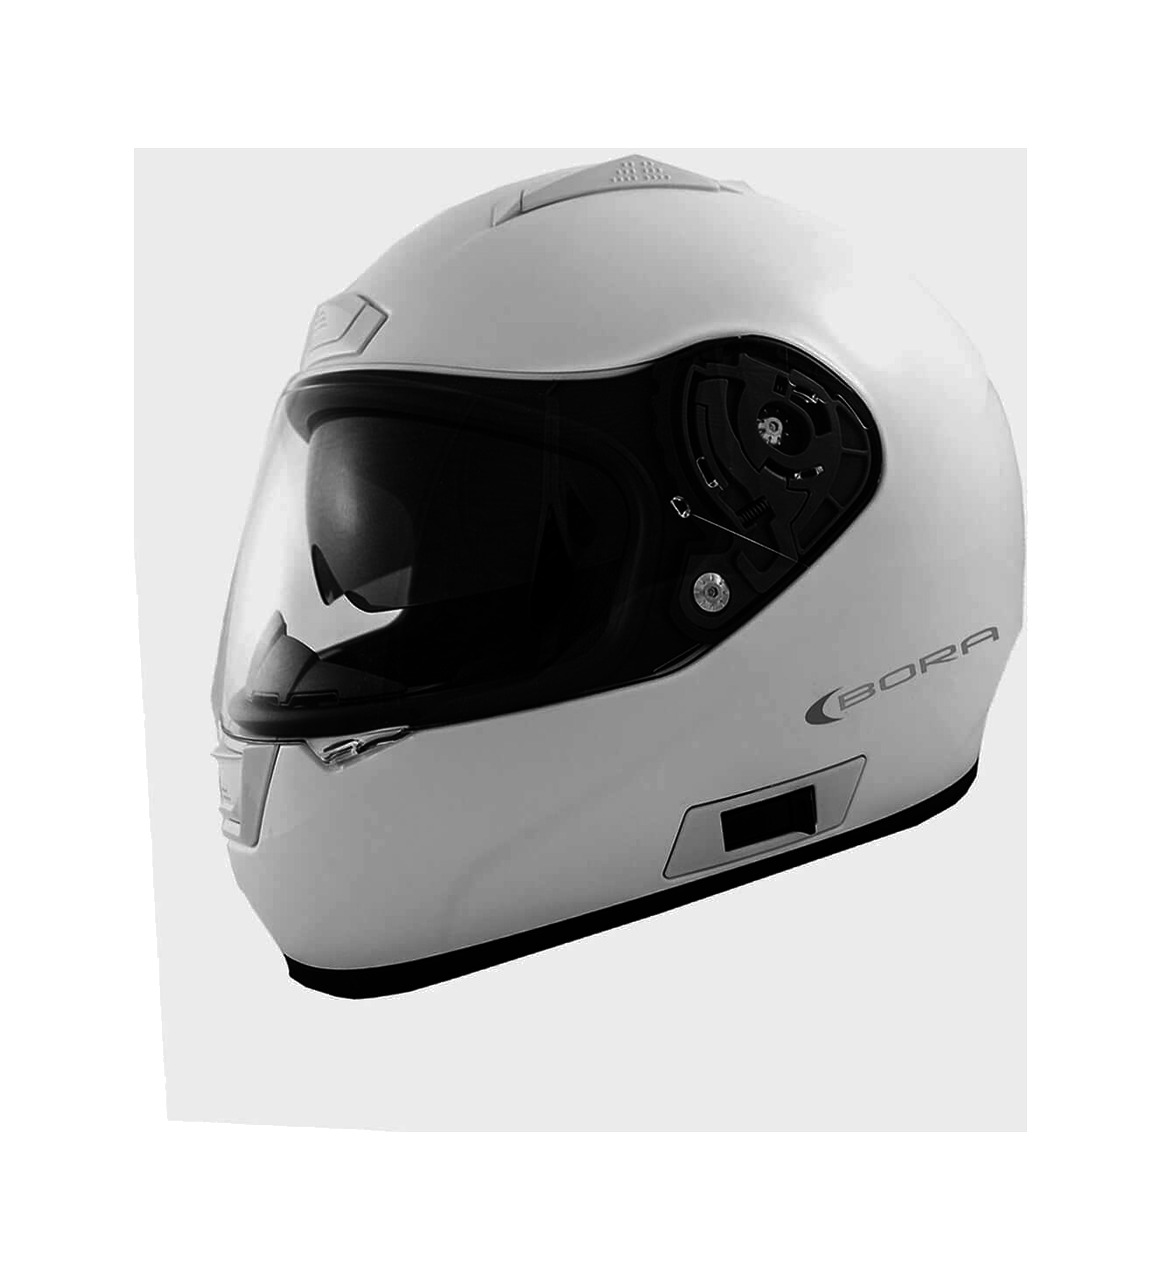 BORA Full Face Helmet with Retractable Sun Visor | Approved P ECE 22.05 by LEM - Picture 1 of 1